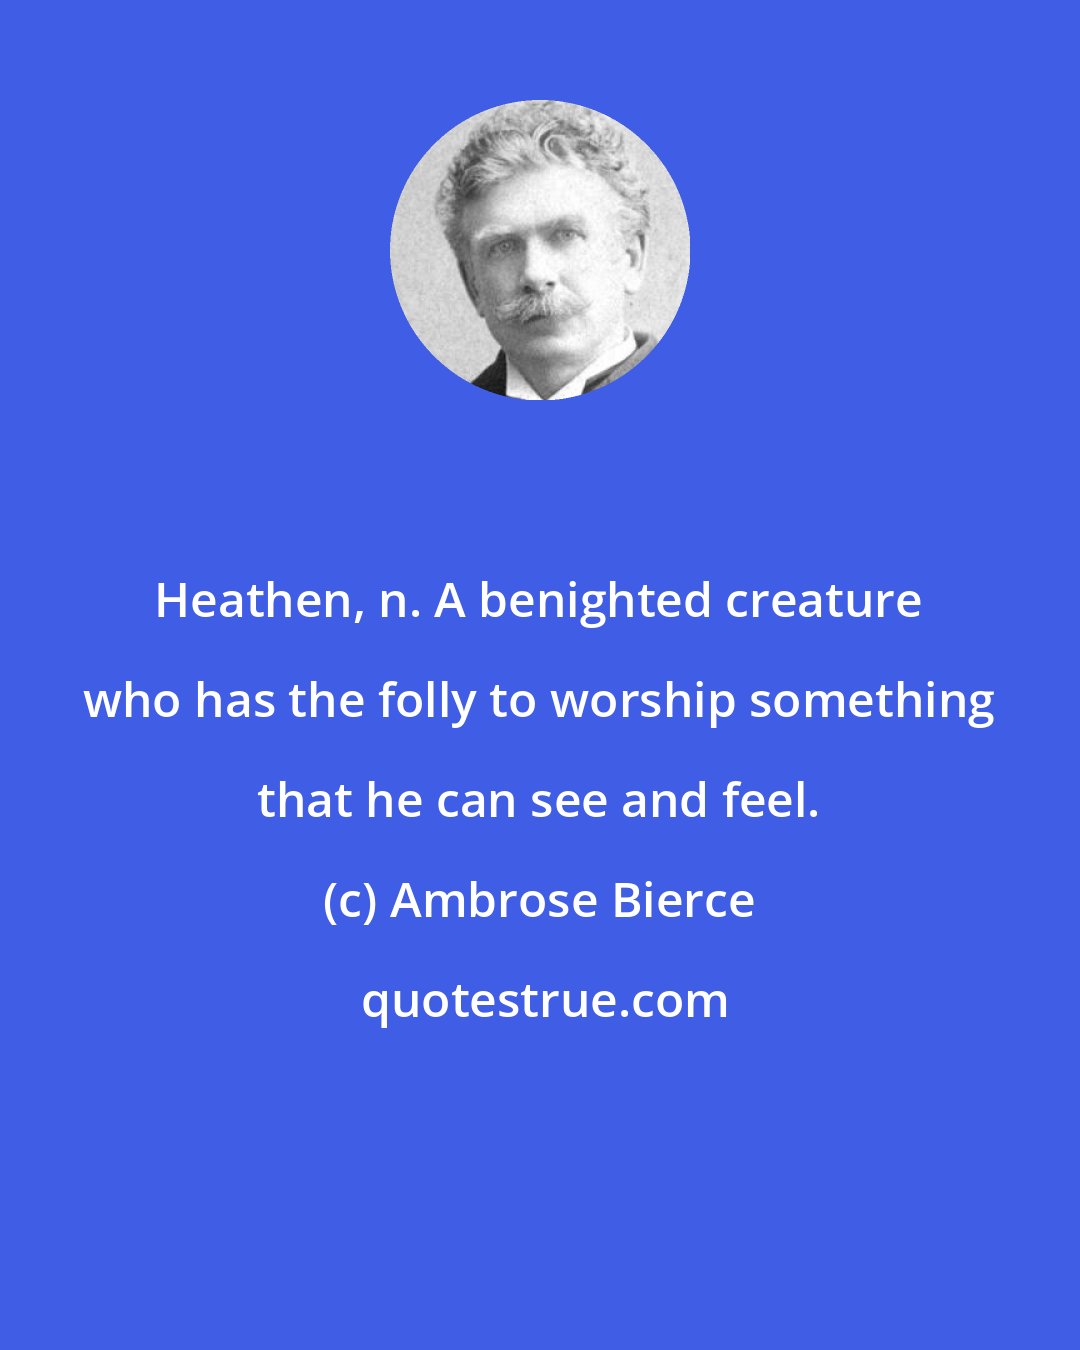 Ambrose Bierce: Heathen, n. A benighted creature who has the folly to worship something that he can see and feel.